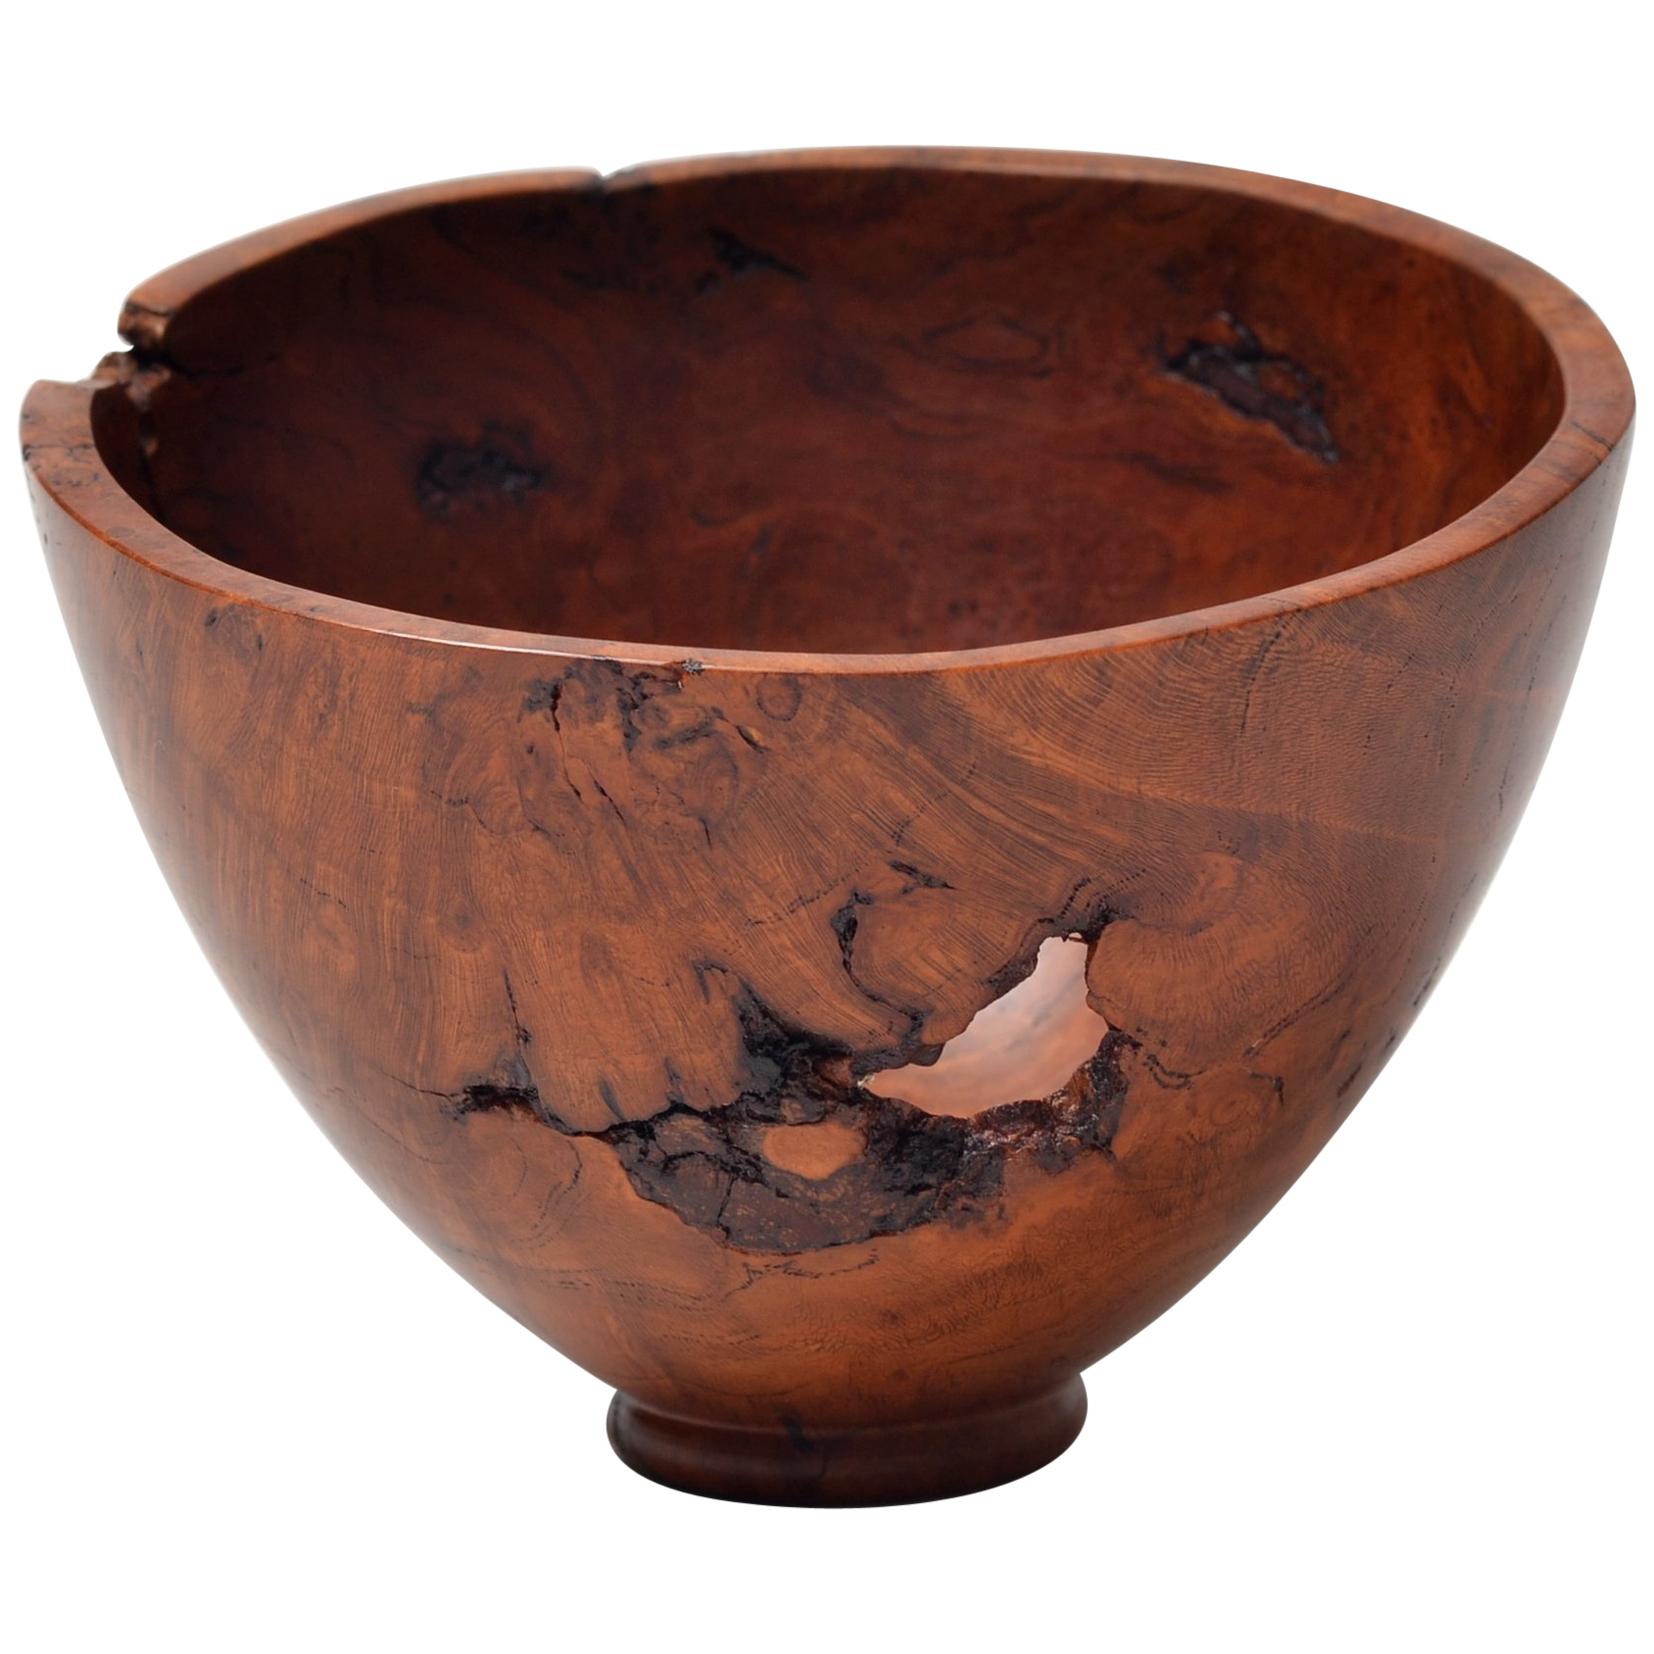 Decorative Wooden Bowl by Dustin Coates For Sale